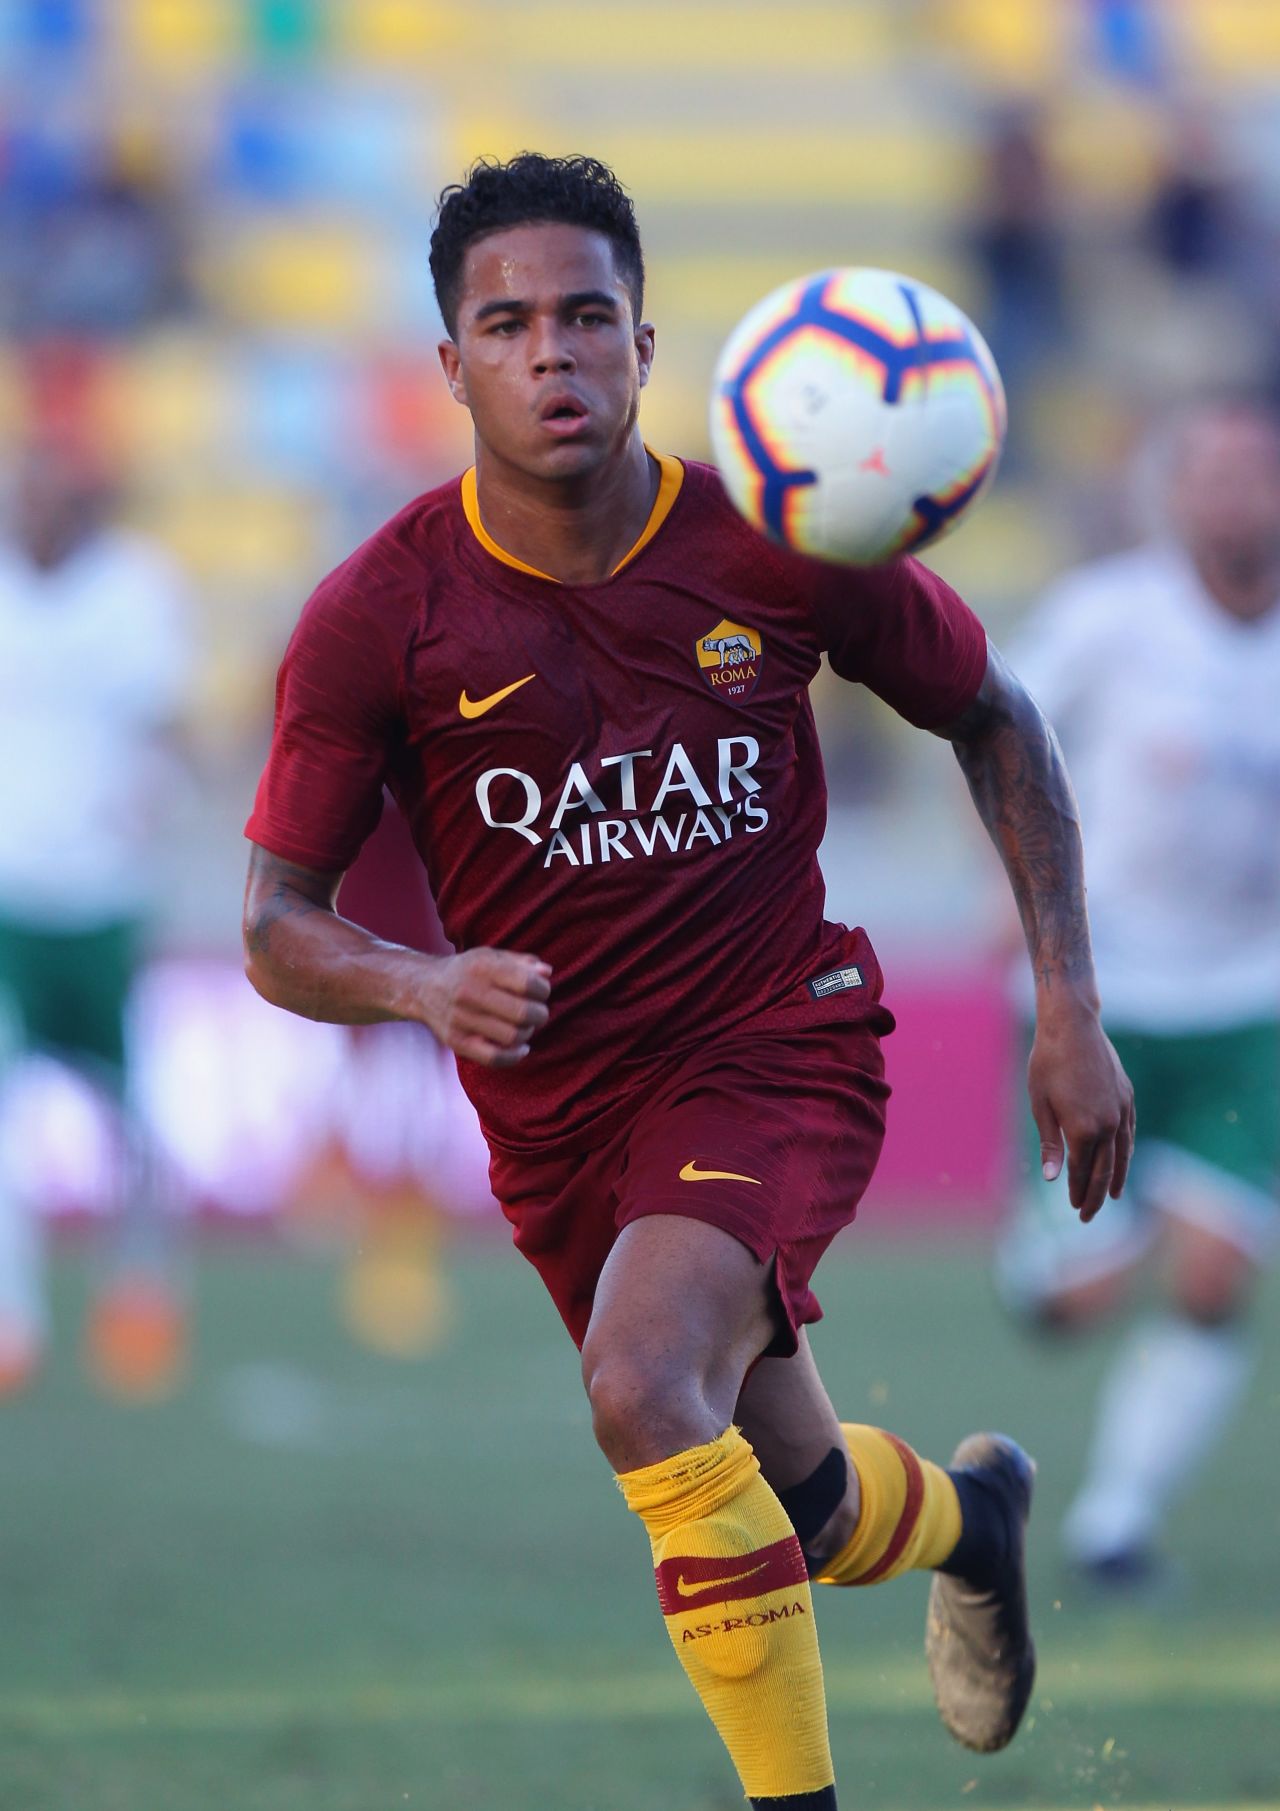 Justin Kluivert signed a long-term deal with AS Roma worth an initial $19.5 million. The 19-year-old Dutch winger left Ajax Amsterdam for a five-year contract lasting until June 30, 2023.